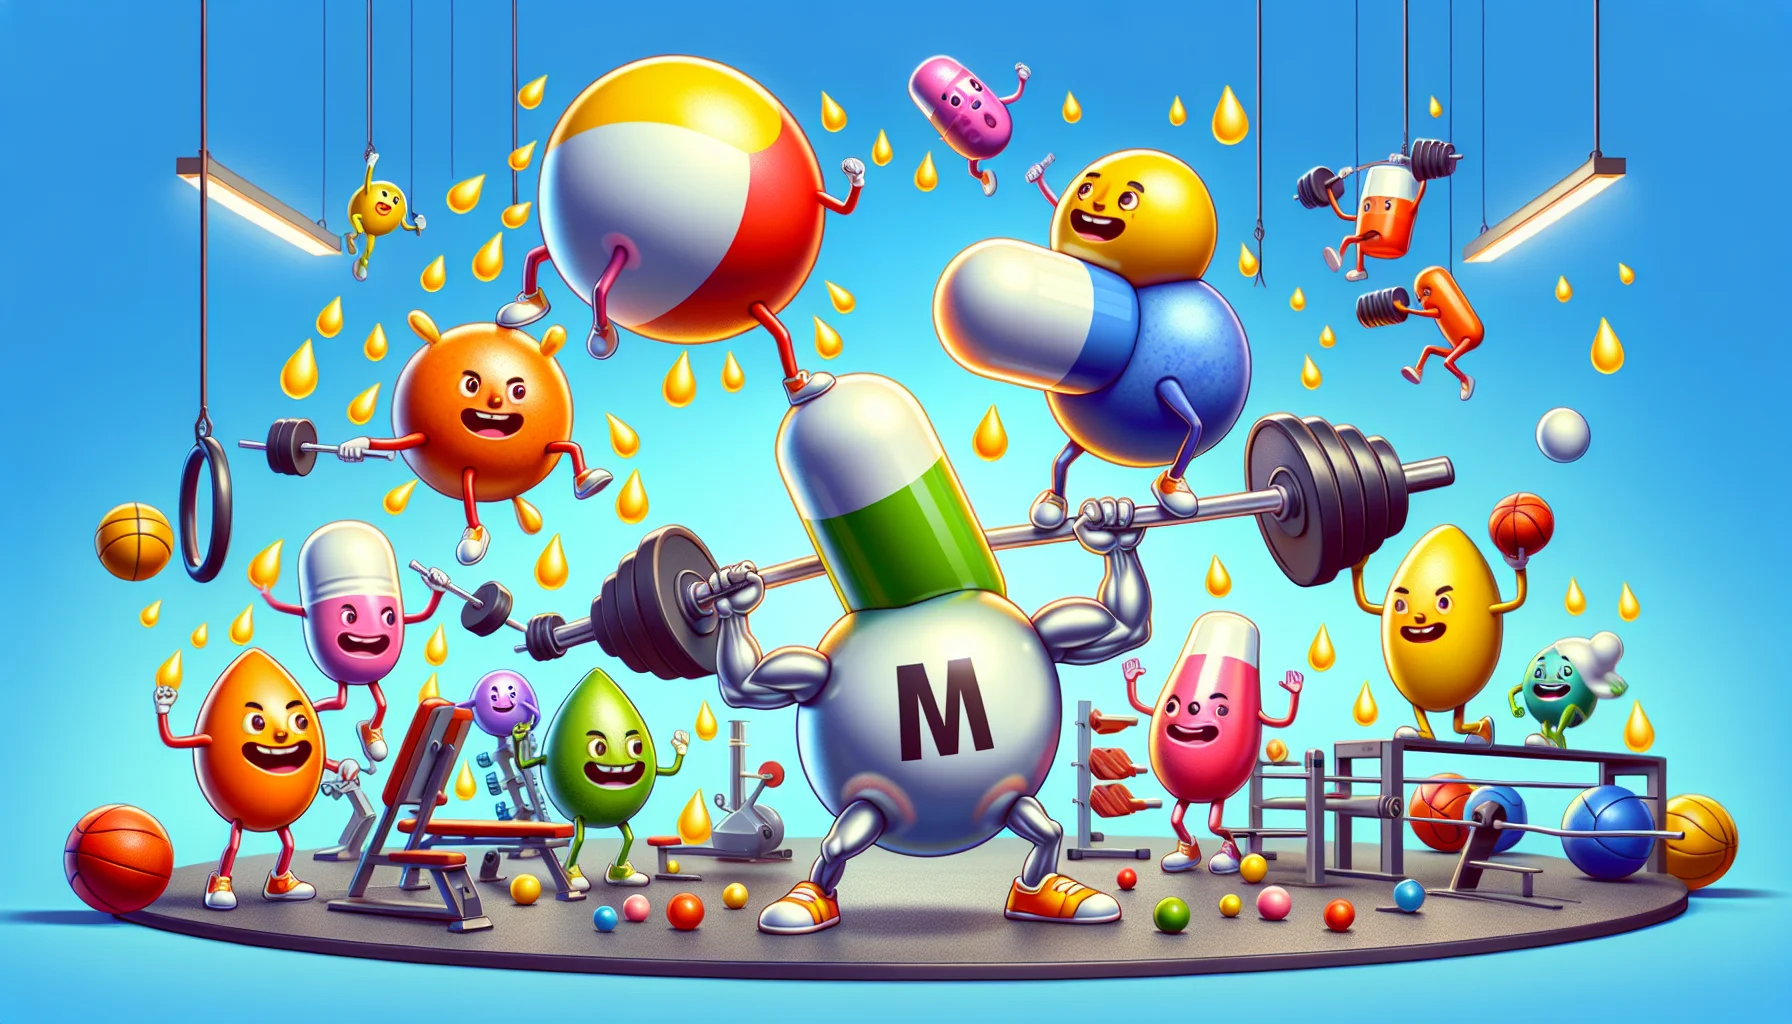 Illustrate a humorous and lively scene in a gym environment where everyone is participating in sports. A giant magnesium molecule, visible and made tangible, is lifting weights while being cheered on by a variety of vitamins like vitamin C, D, B and E who are doing their own exercises. Perspire drops, symbolizing the sweating of the gym-goers, are depicted as colorful supplement capsules, emphasizing the importance of these nutrients for sports activity and health. The entire scenario should indicate the essential role of mineral and vitamin supplements alongside physical activities in a fun, quirky, and informative way.